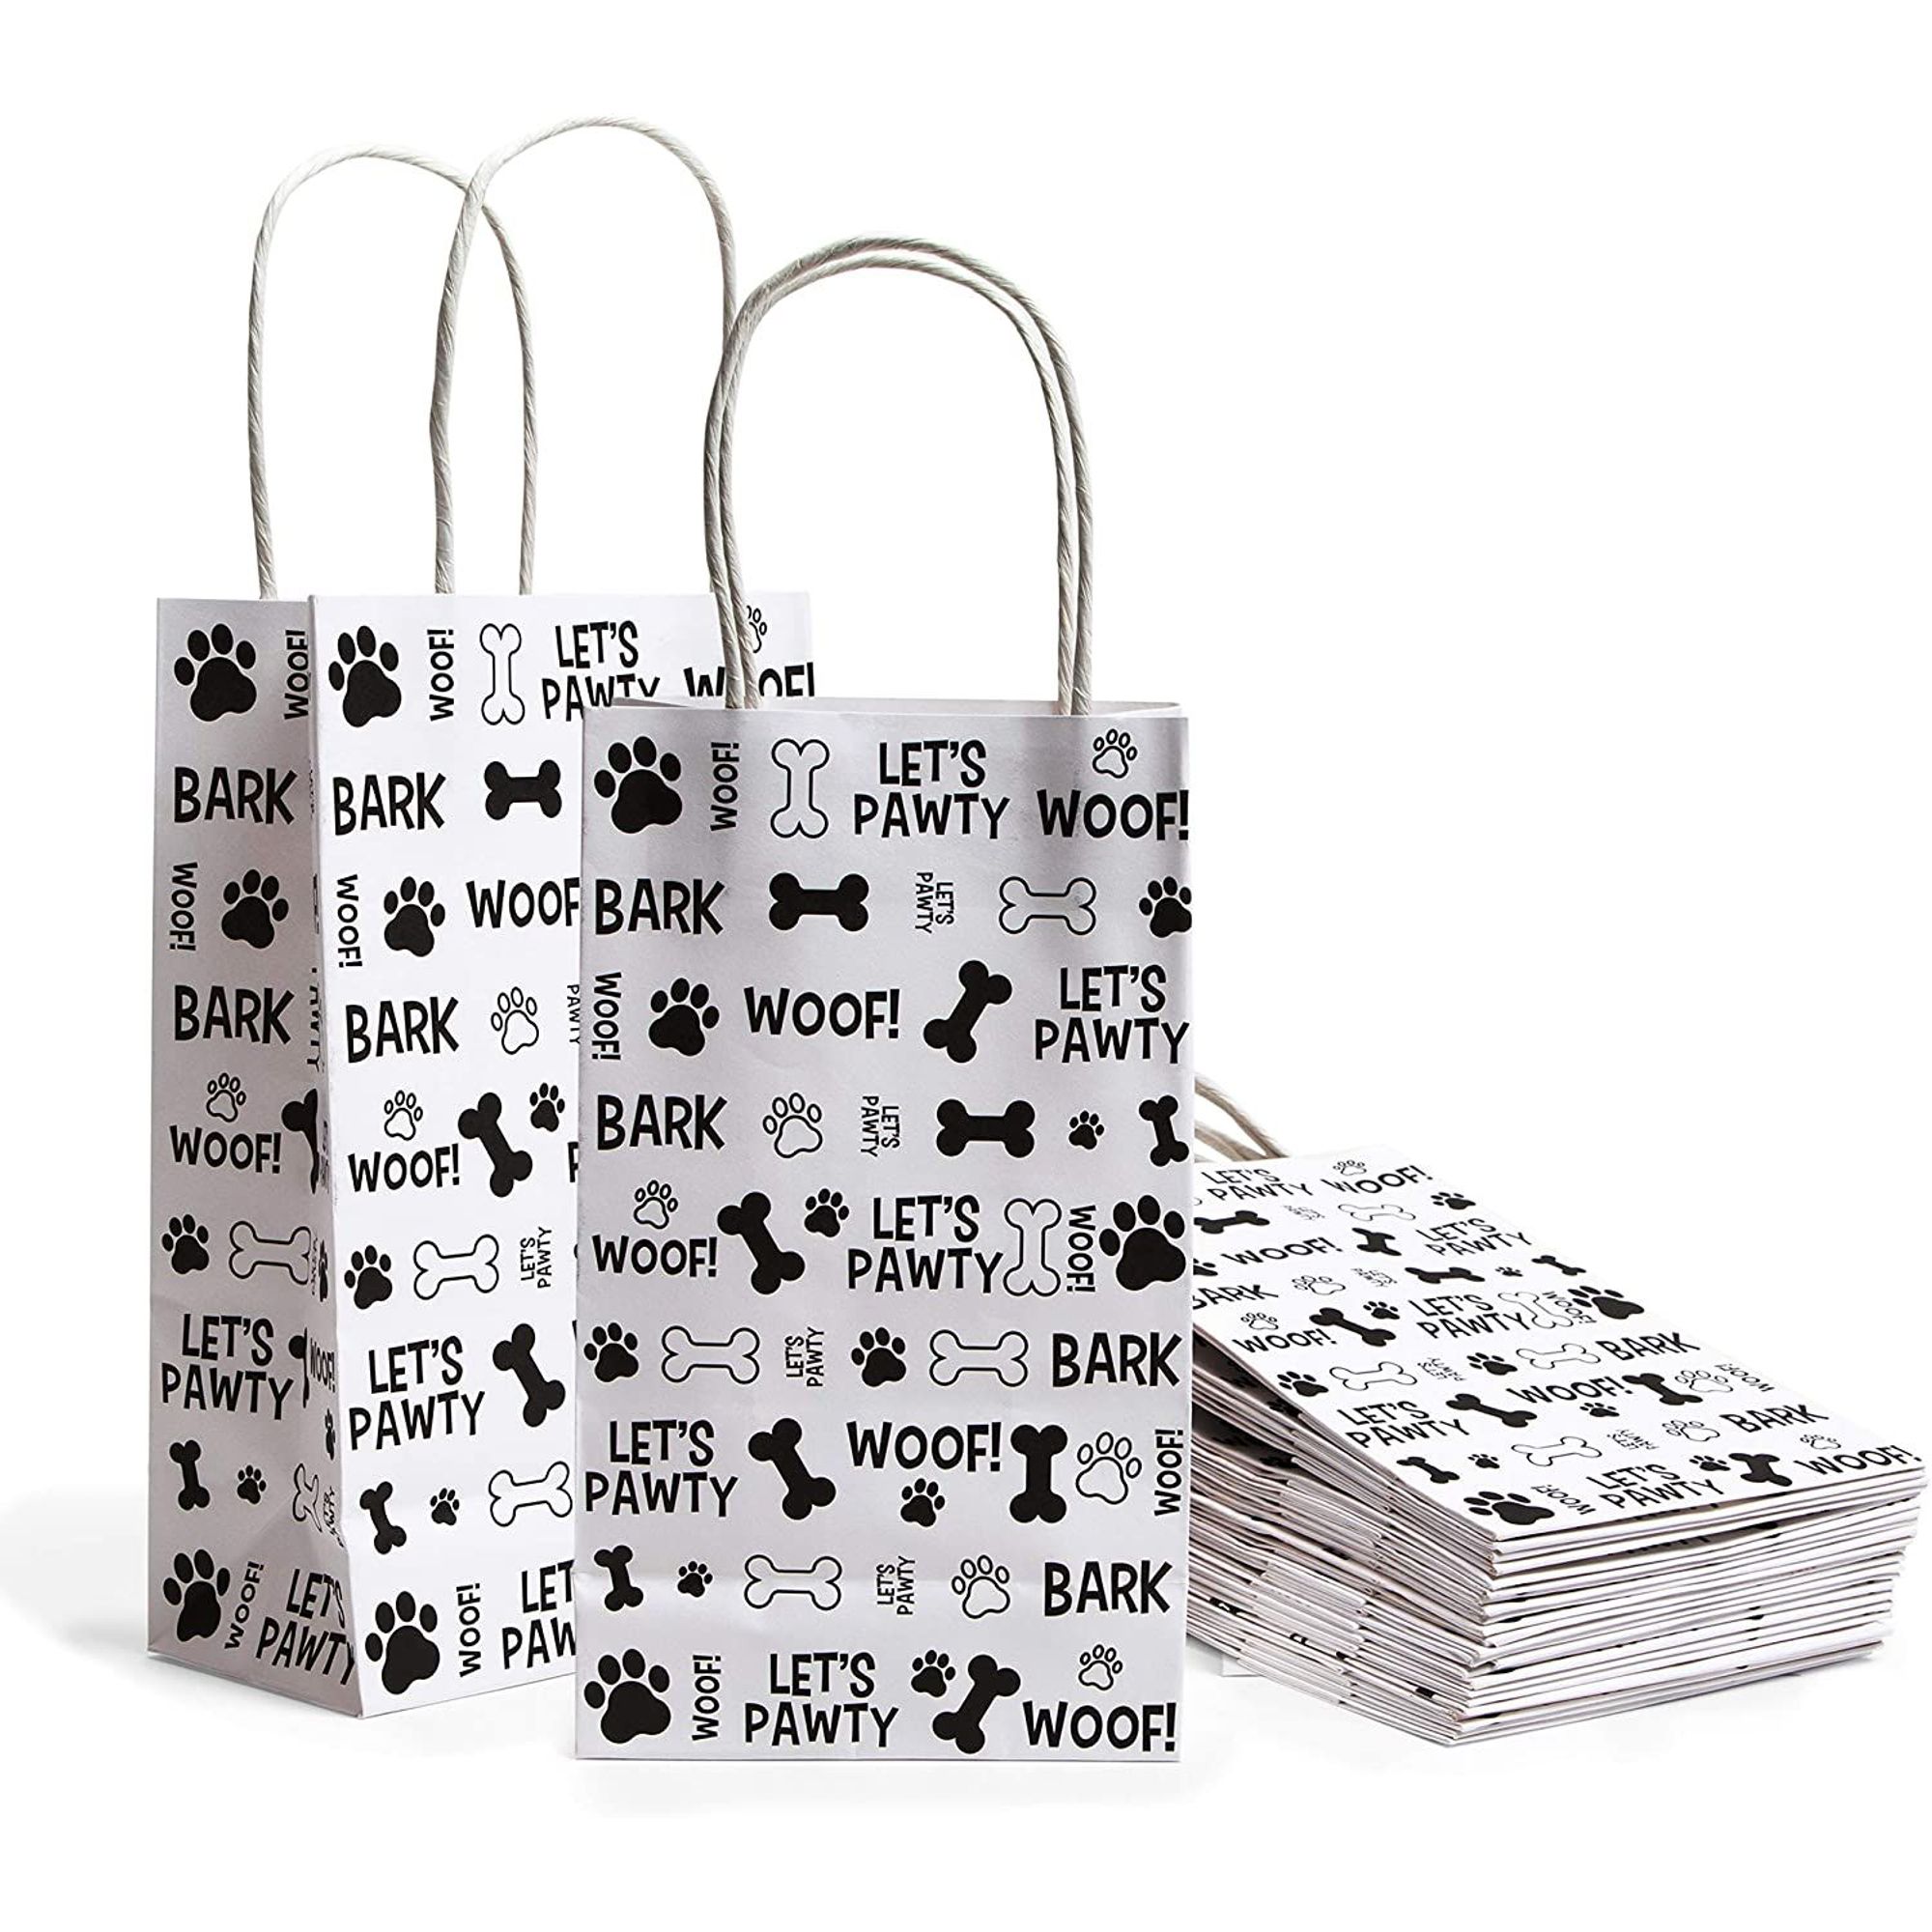 Dog Theme Party Dog Theme Birthday Party Dog Mom Gift Christmas Gift Wrapping Dog Pattern Gift Wrapping Paper Dogs Tissue Paper